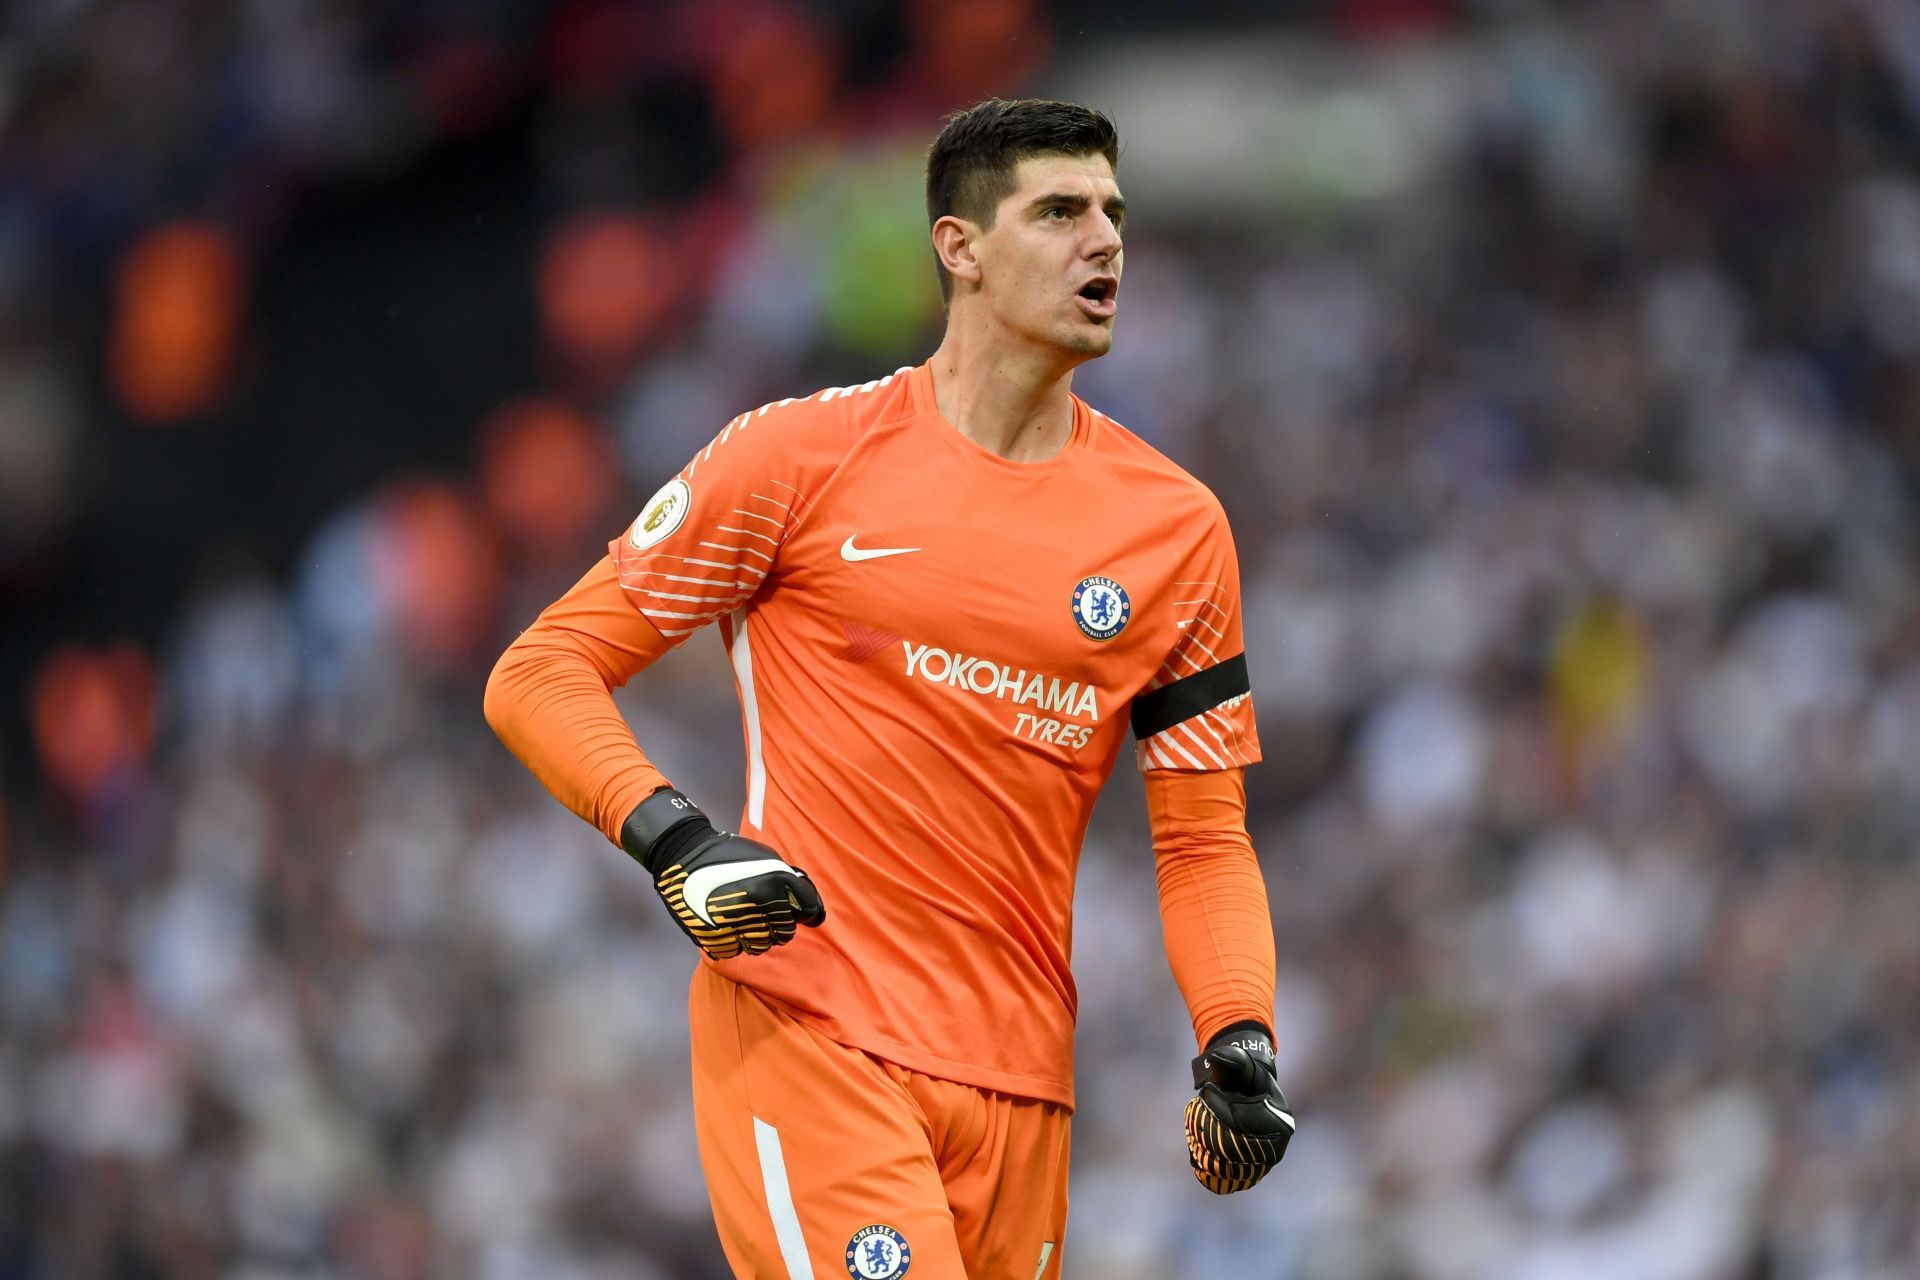 Courtois played for both Chelsea and Atletico Madrid